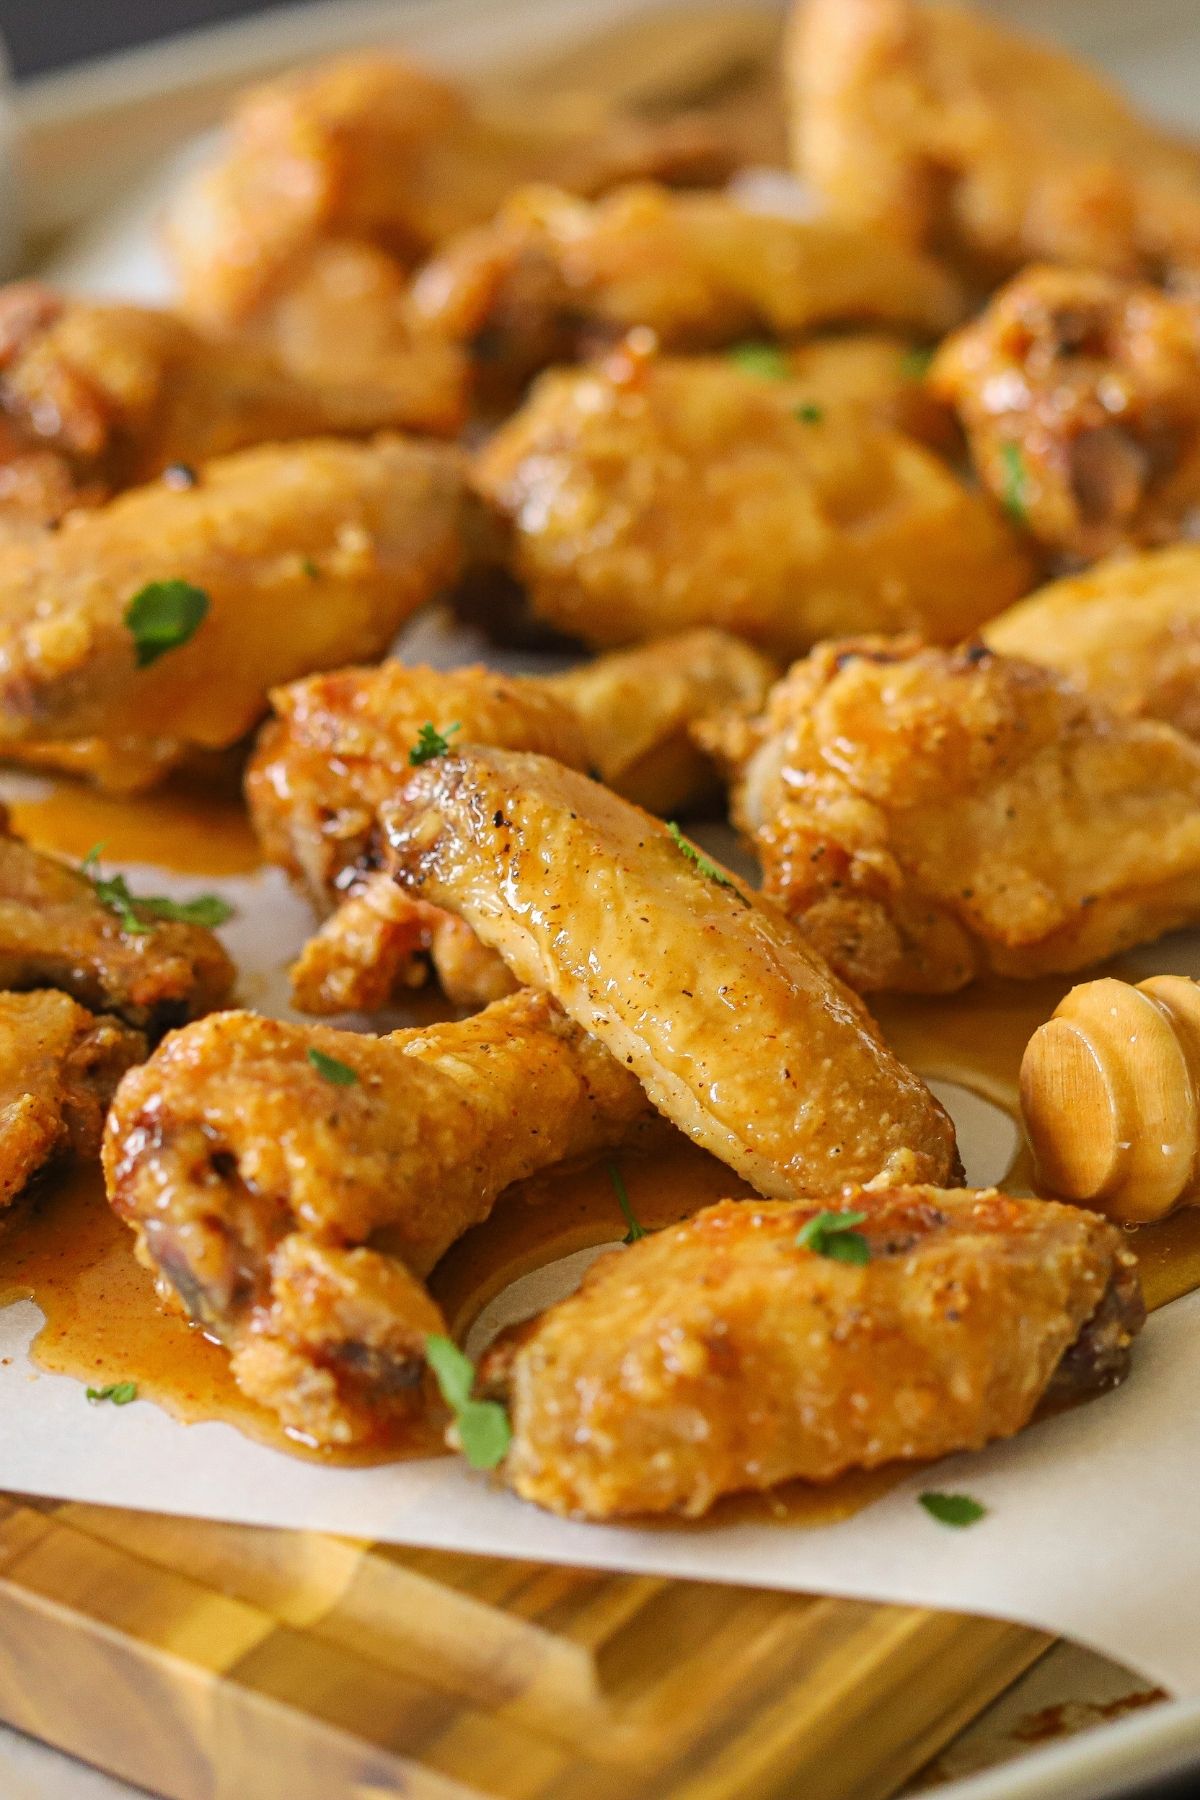 a pile of crispy chicken wings coated in a spicy honey sauce